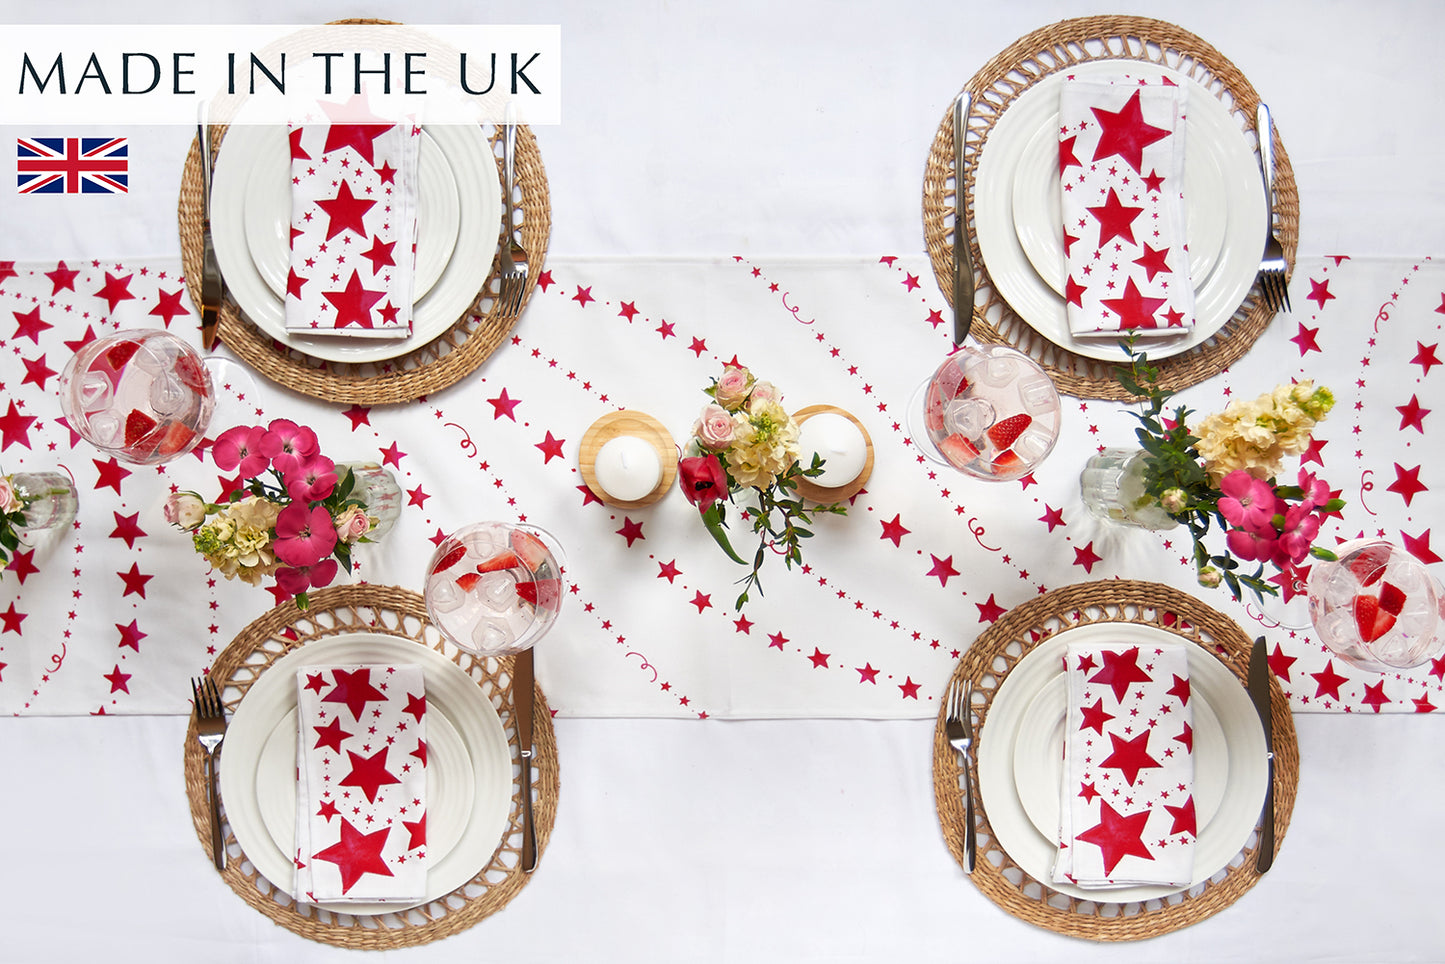 Red Stars table runner on a white cloth with 4 place settings